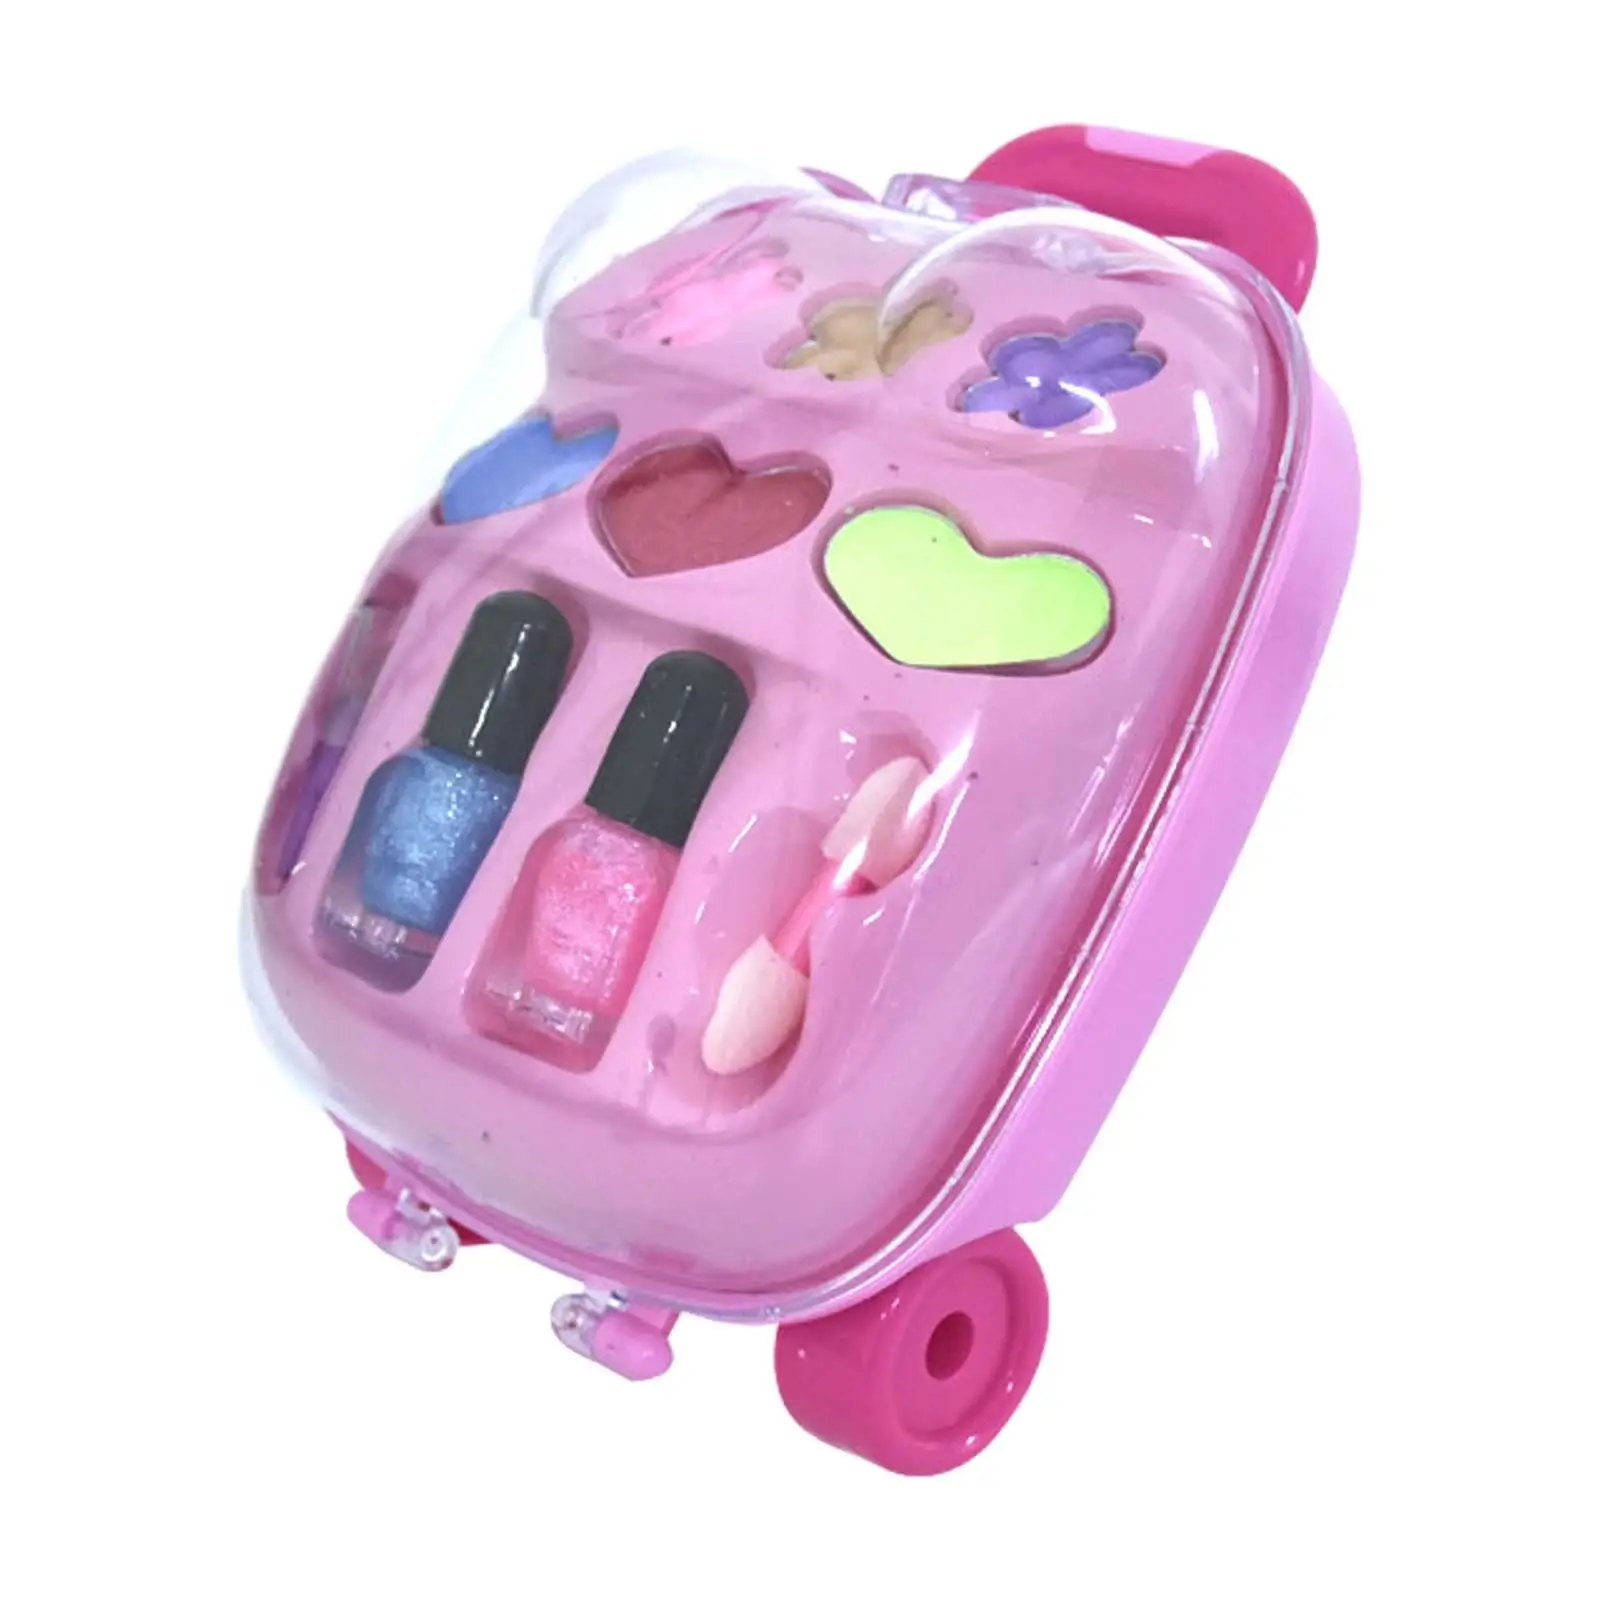 Princess Cosmetic Toy Pretend Cosmetic Makeup Accessories Kids Makeup Kits for Girls Kids Children Toddlers Birthday Toys Gift